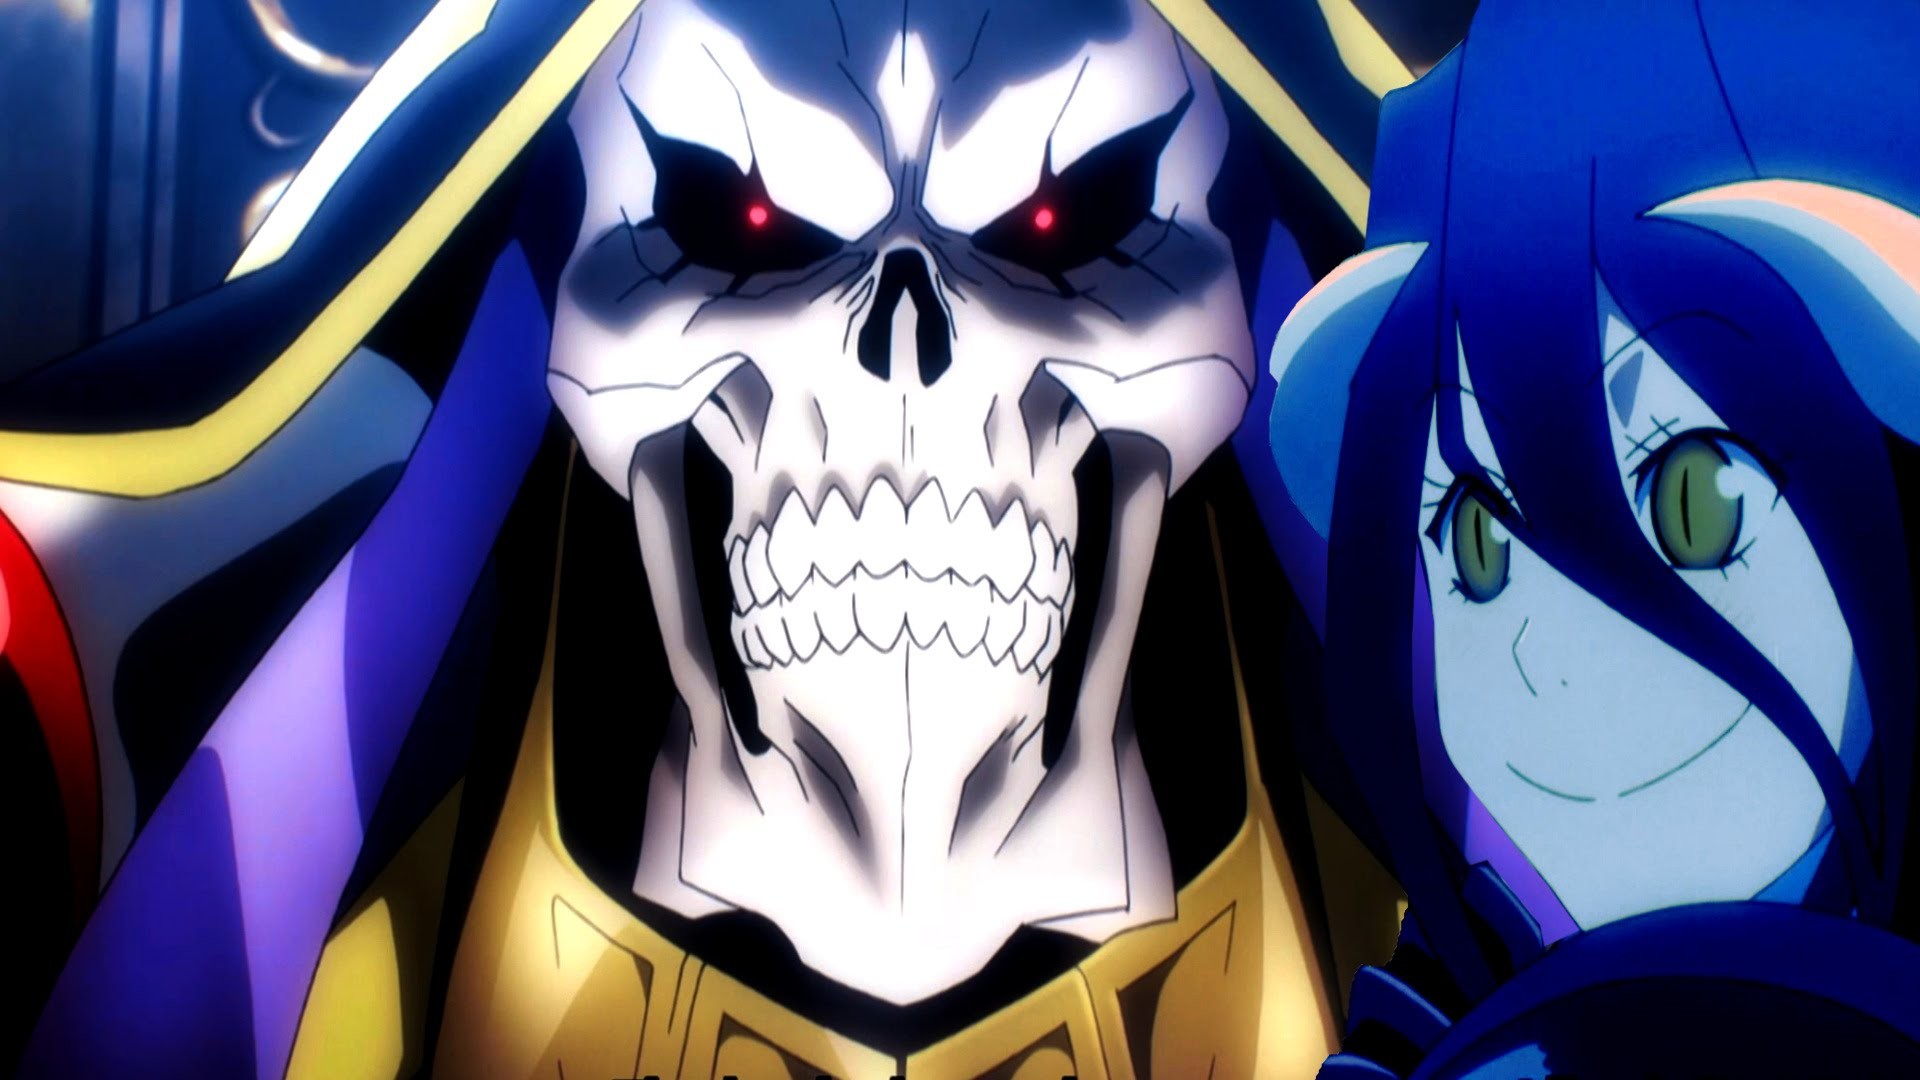 1920x1080 Overlord Episode 4 ãªã¼ãã¼ã­ã¼ã Anime Review - Ainz The Overlord - YouTube